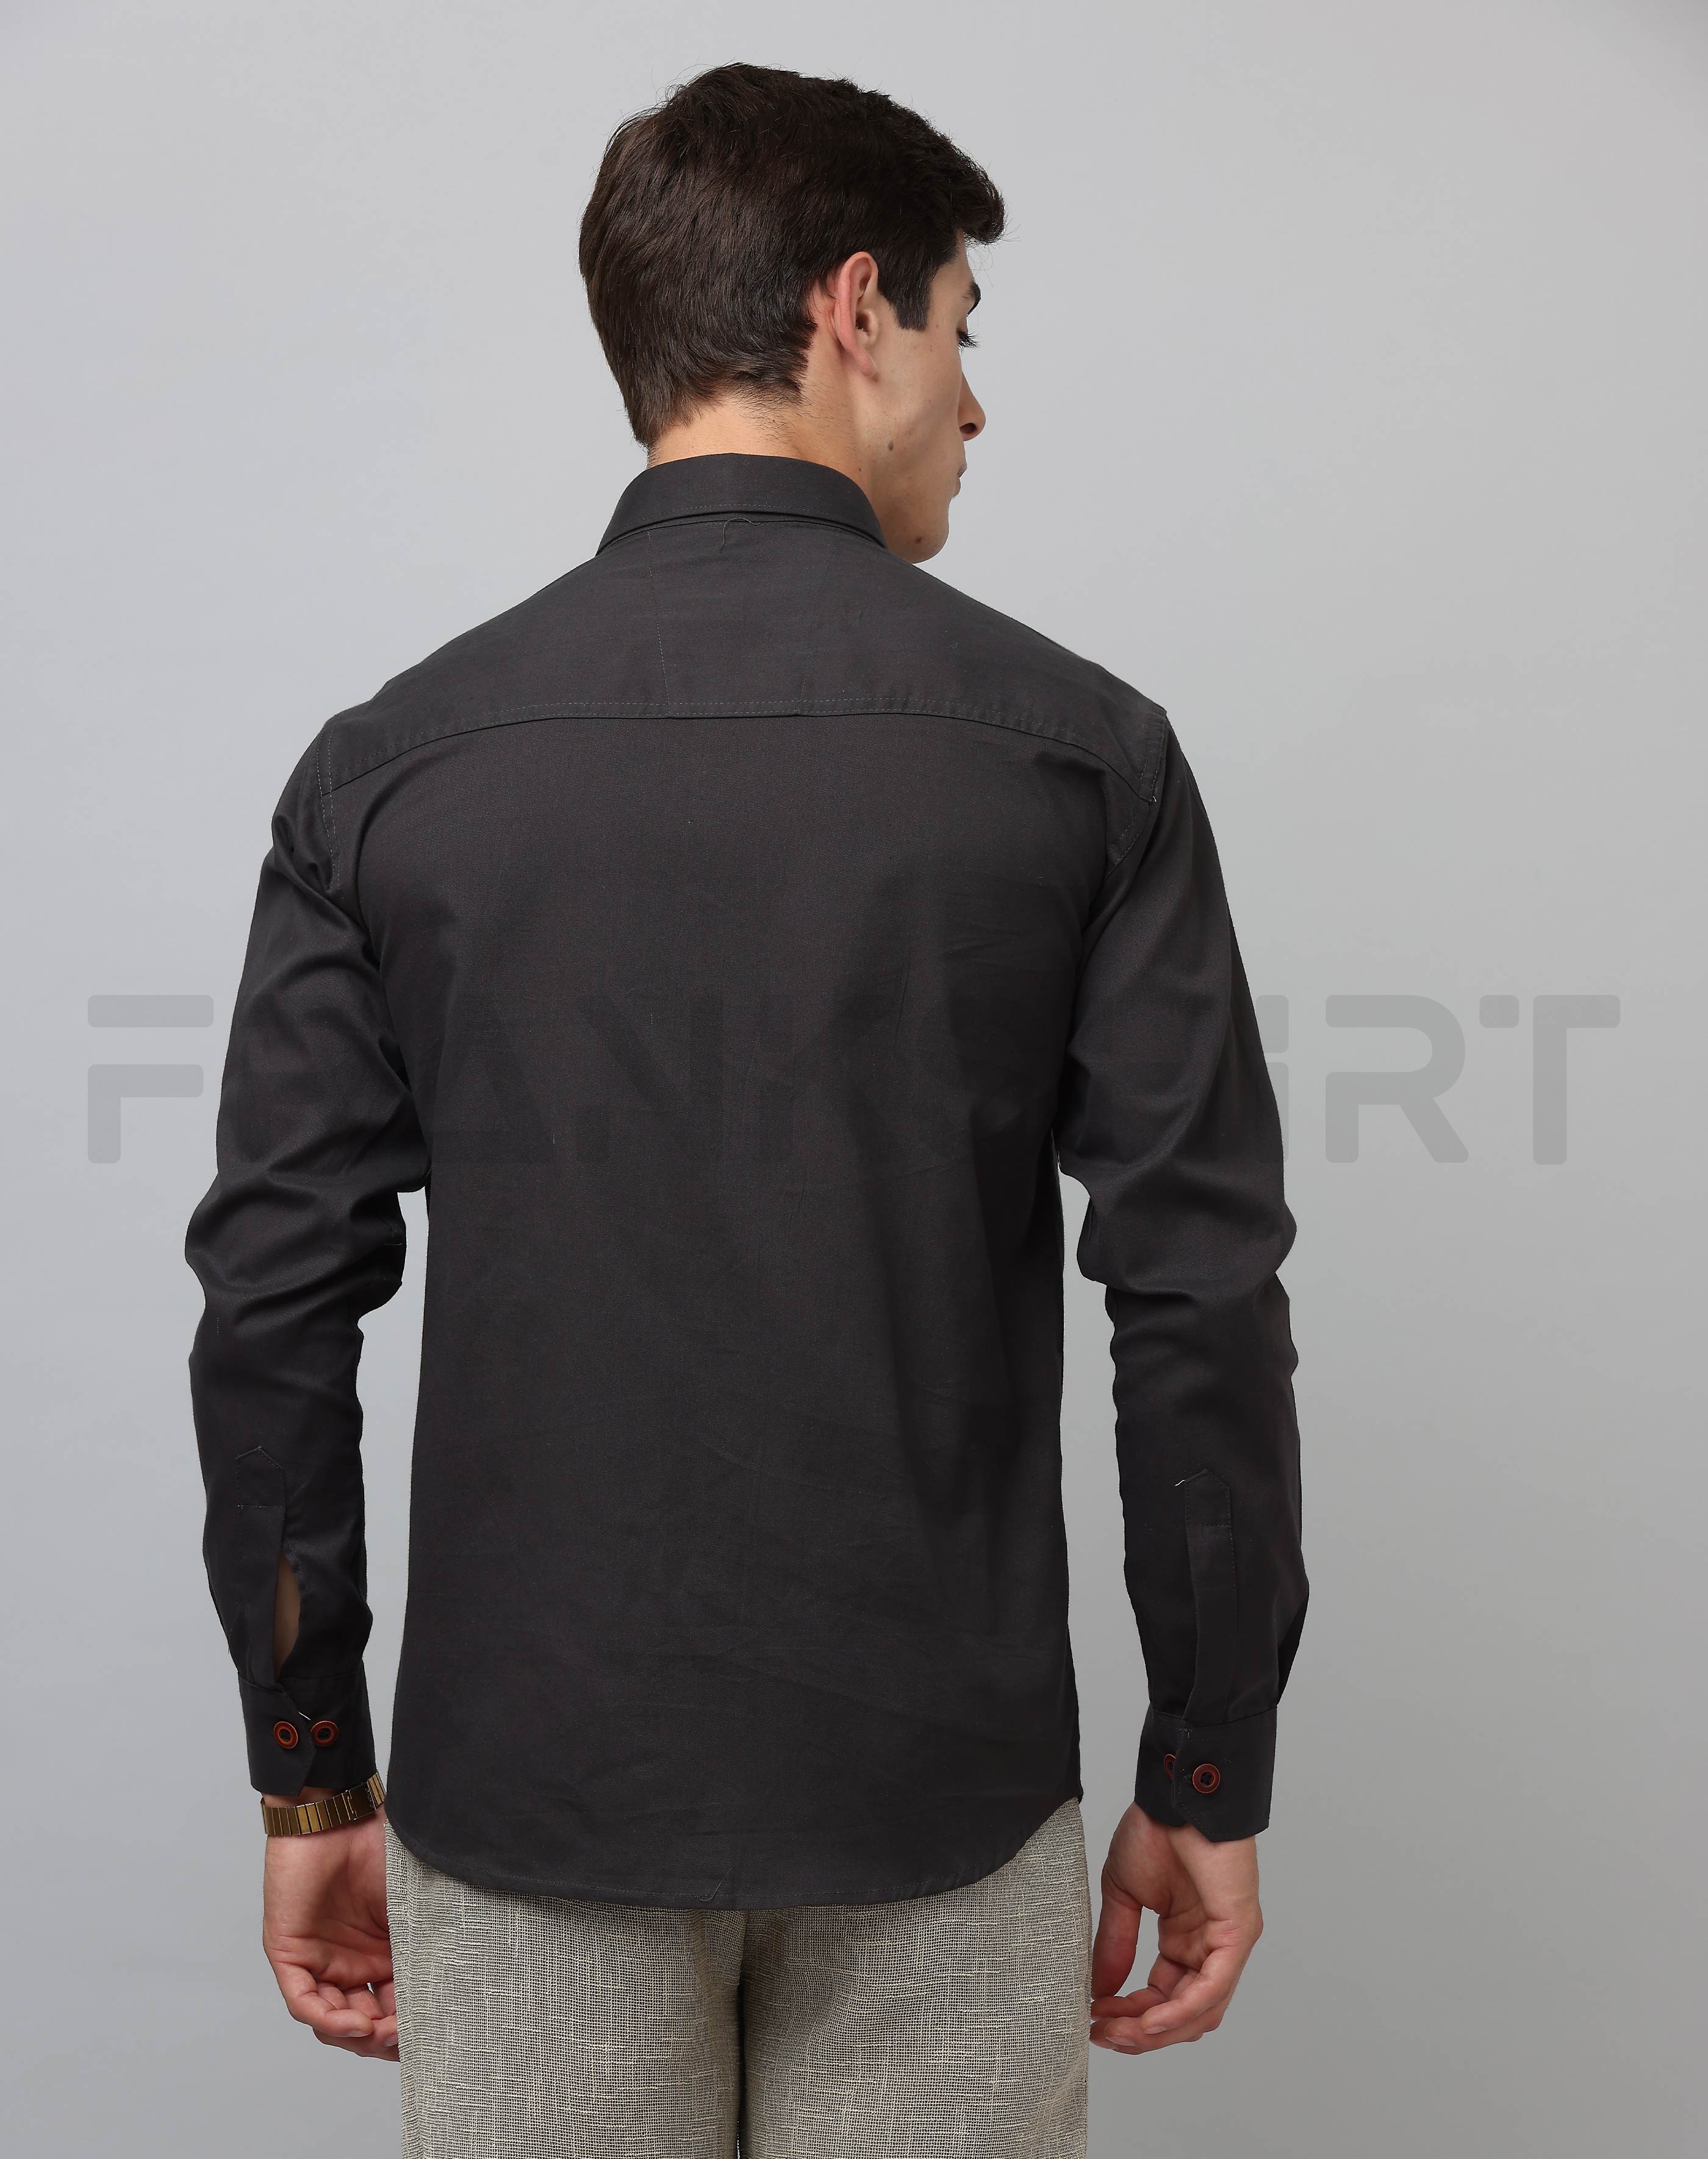 Frankshirt Double Pocket Dark Grey Solid Tailored Fit Cotton Casual Shirt for Man